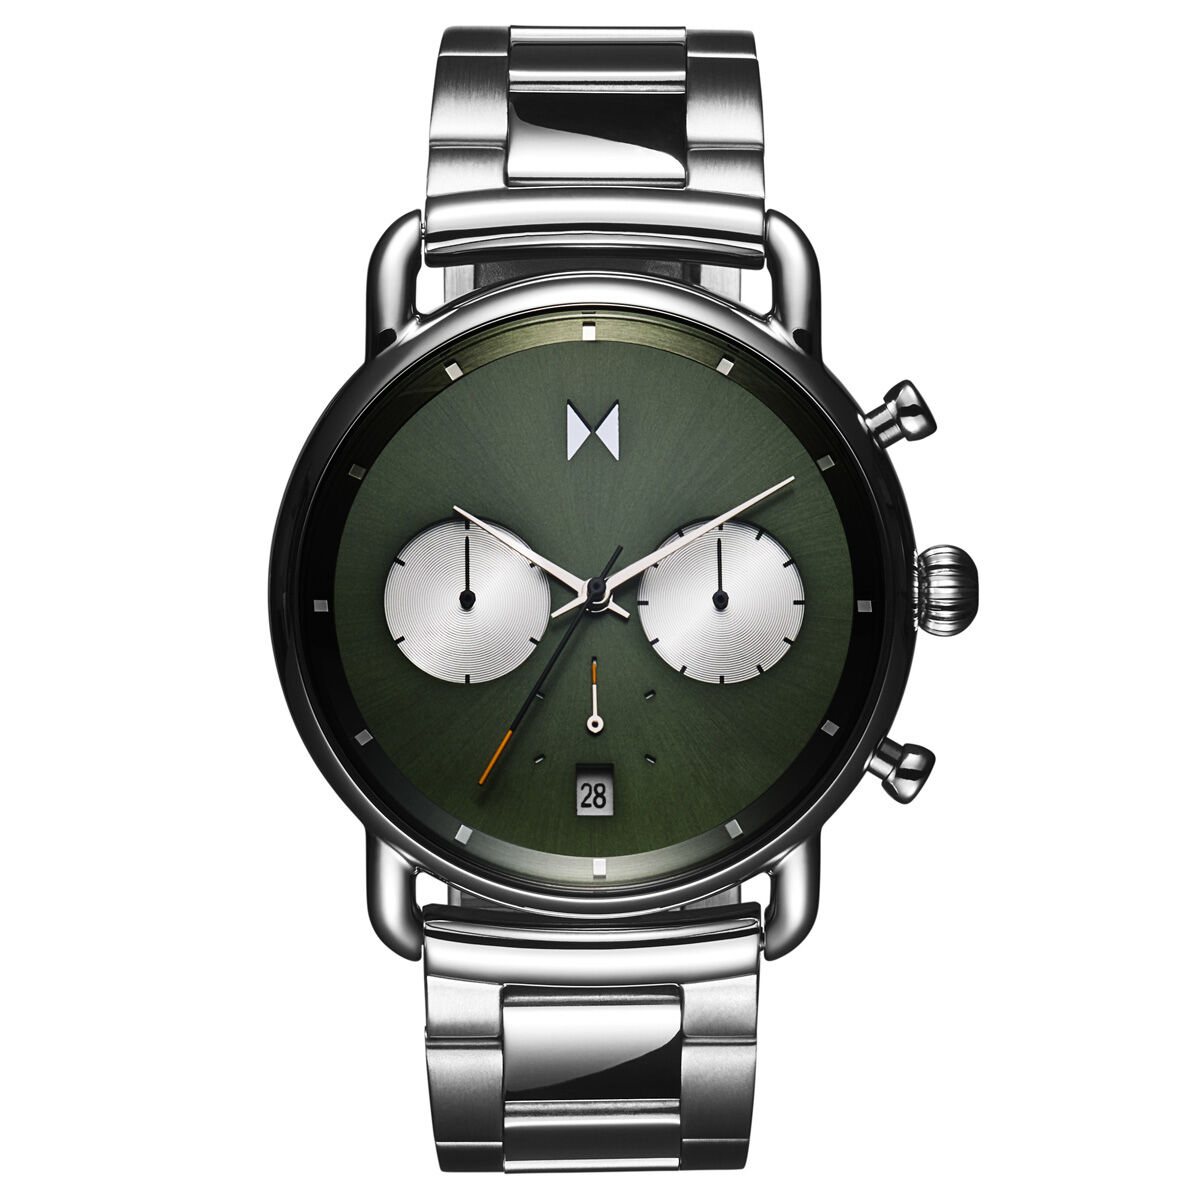 MVMT watches. Thoughts & opinions? | WatchUSeek Watch Forums